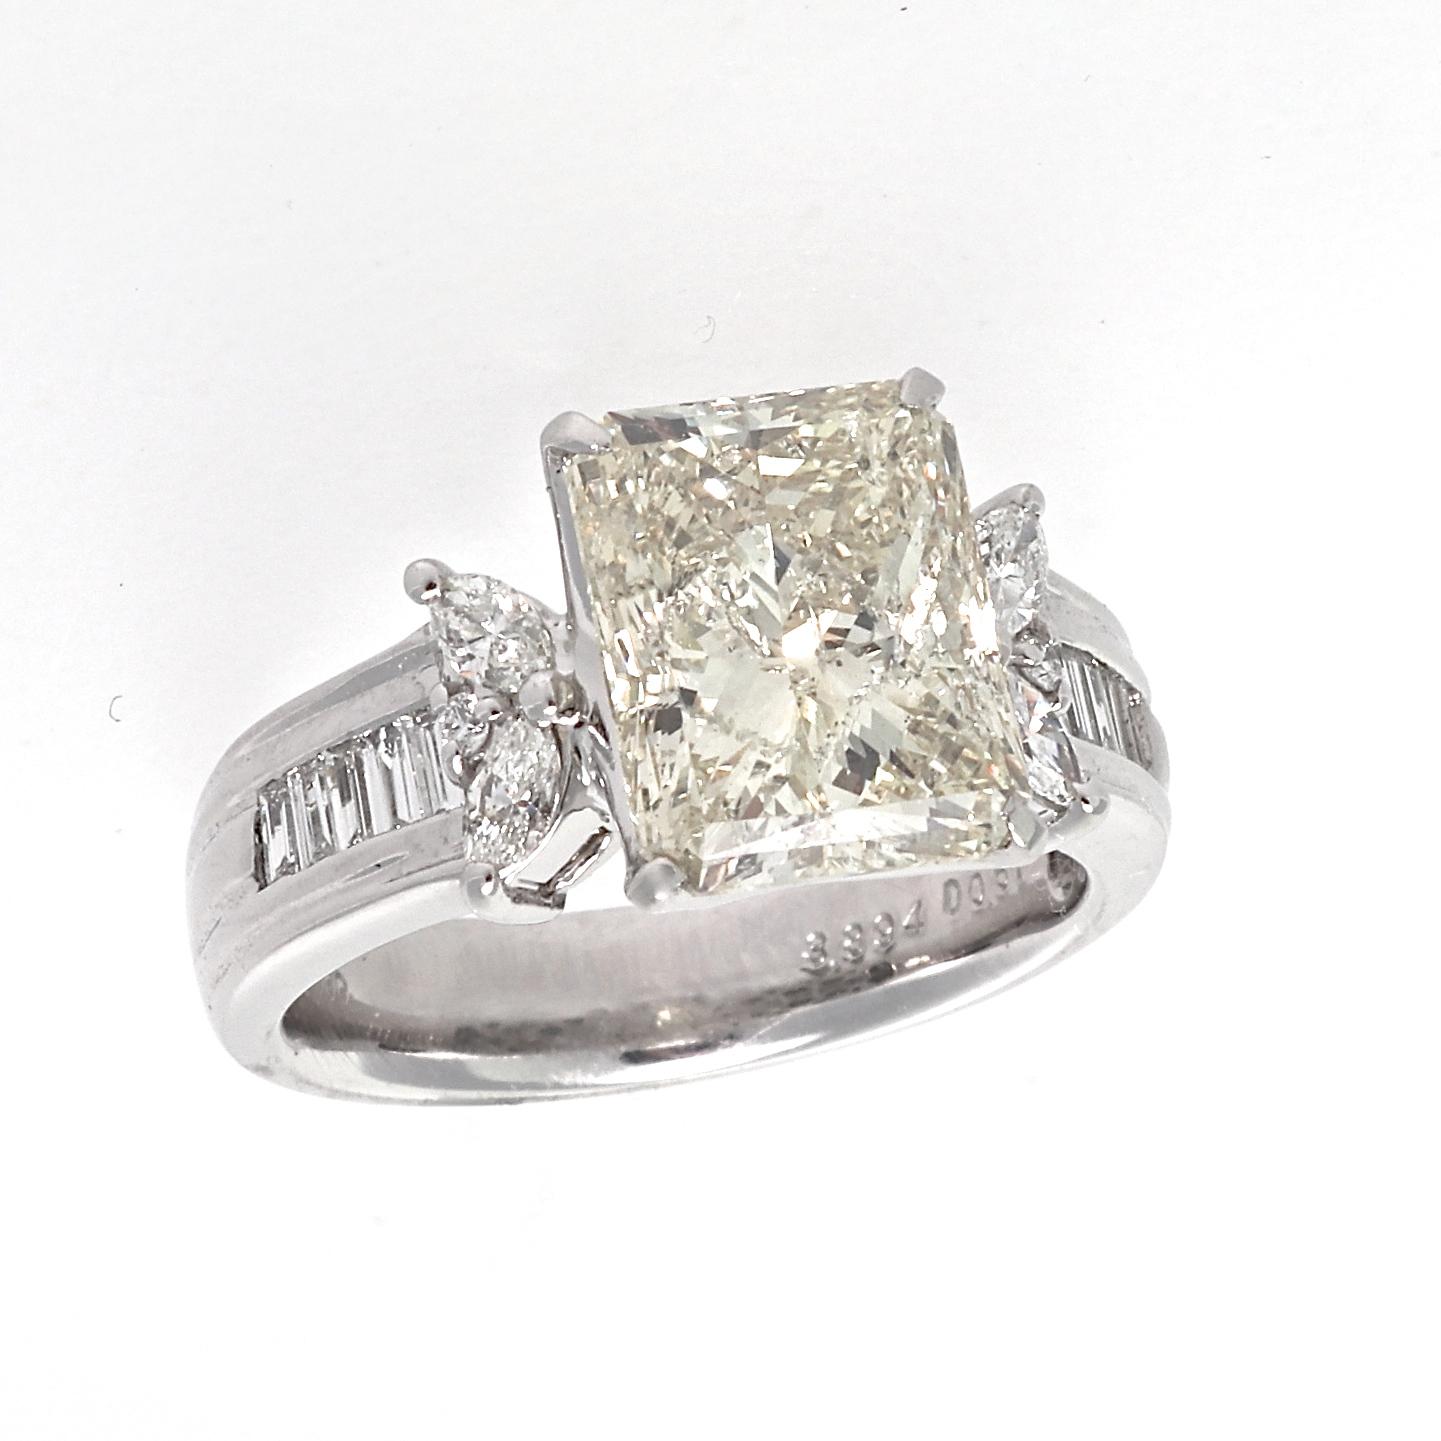 Deriving tradition into modern design is a sentiment that lasts a lifetime. Featuring a  3.89 carat radiant cut diamond that illuminates light yellow natural color and is slightly included. Exquisitely accented by numerous near colorless round,